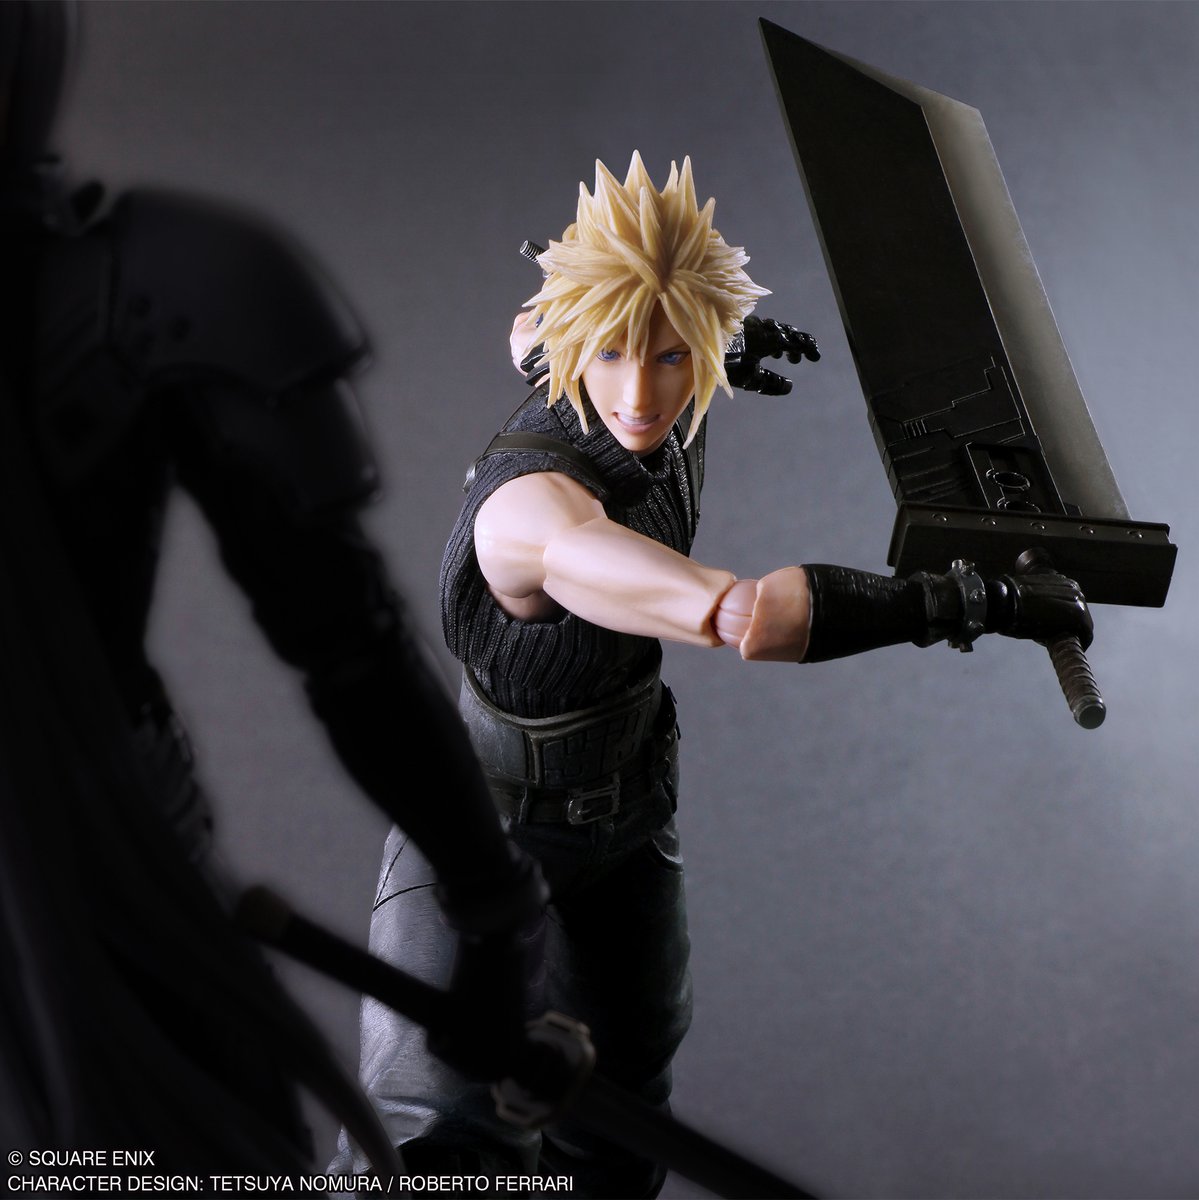 🌩️ LEGENDARY WARRIOR ALERT 🌩️ Cloud Strife from '#FINALFANTASYVIIREBIRTH' storms into the PLAY ARTS Kai series! 🔥 PREORDER YOUR HERO TODAY 👉bit.ly/4doViFN🔥 Featuring his intense battle expression and interchangeable regular face, this figure comes equipped with…